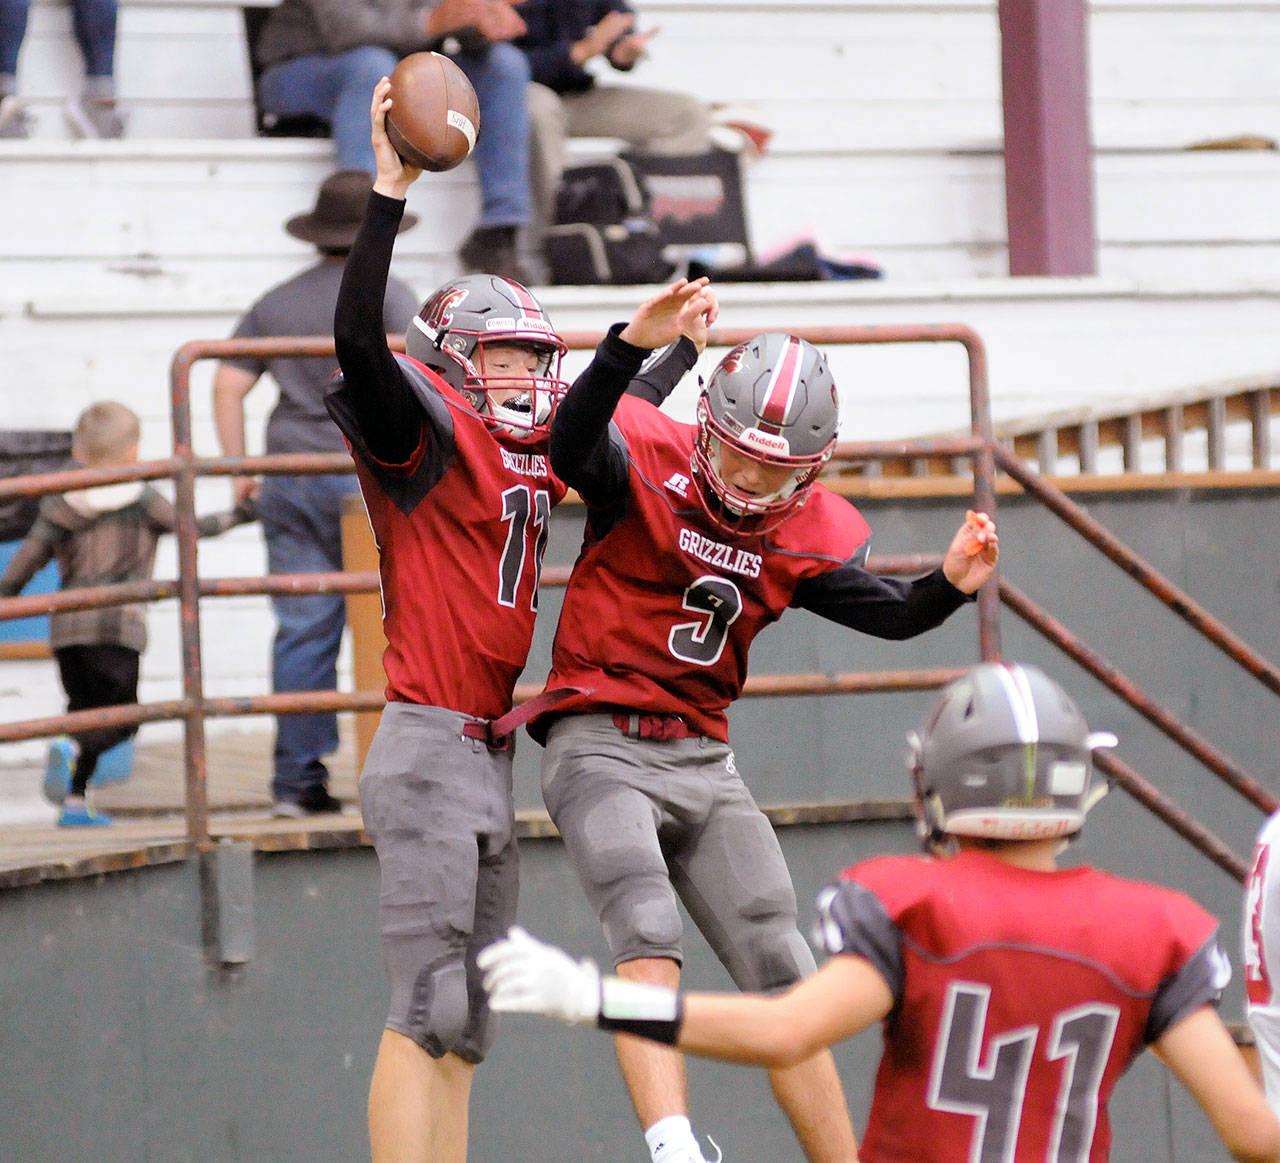 Hoquiam wide receiver Cameron Bumstead, left, celebrates with teammate Dane McMillan after catching a 36-yard touchdown pass from Matt Brown during Hoquiam’s 48-12 victory over Castle Rock on Friday at Olympic Stadium. (Ryan Sparks | Grays Harbor News Group)